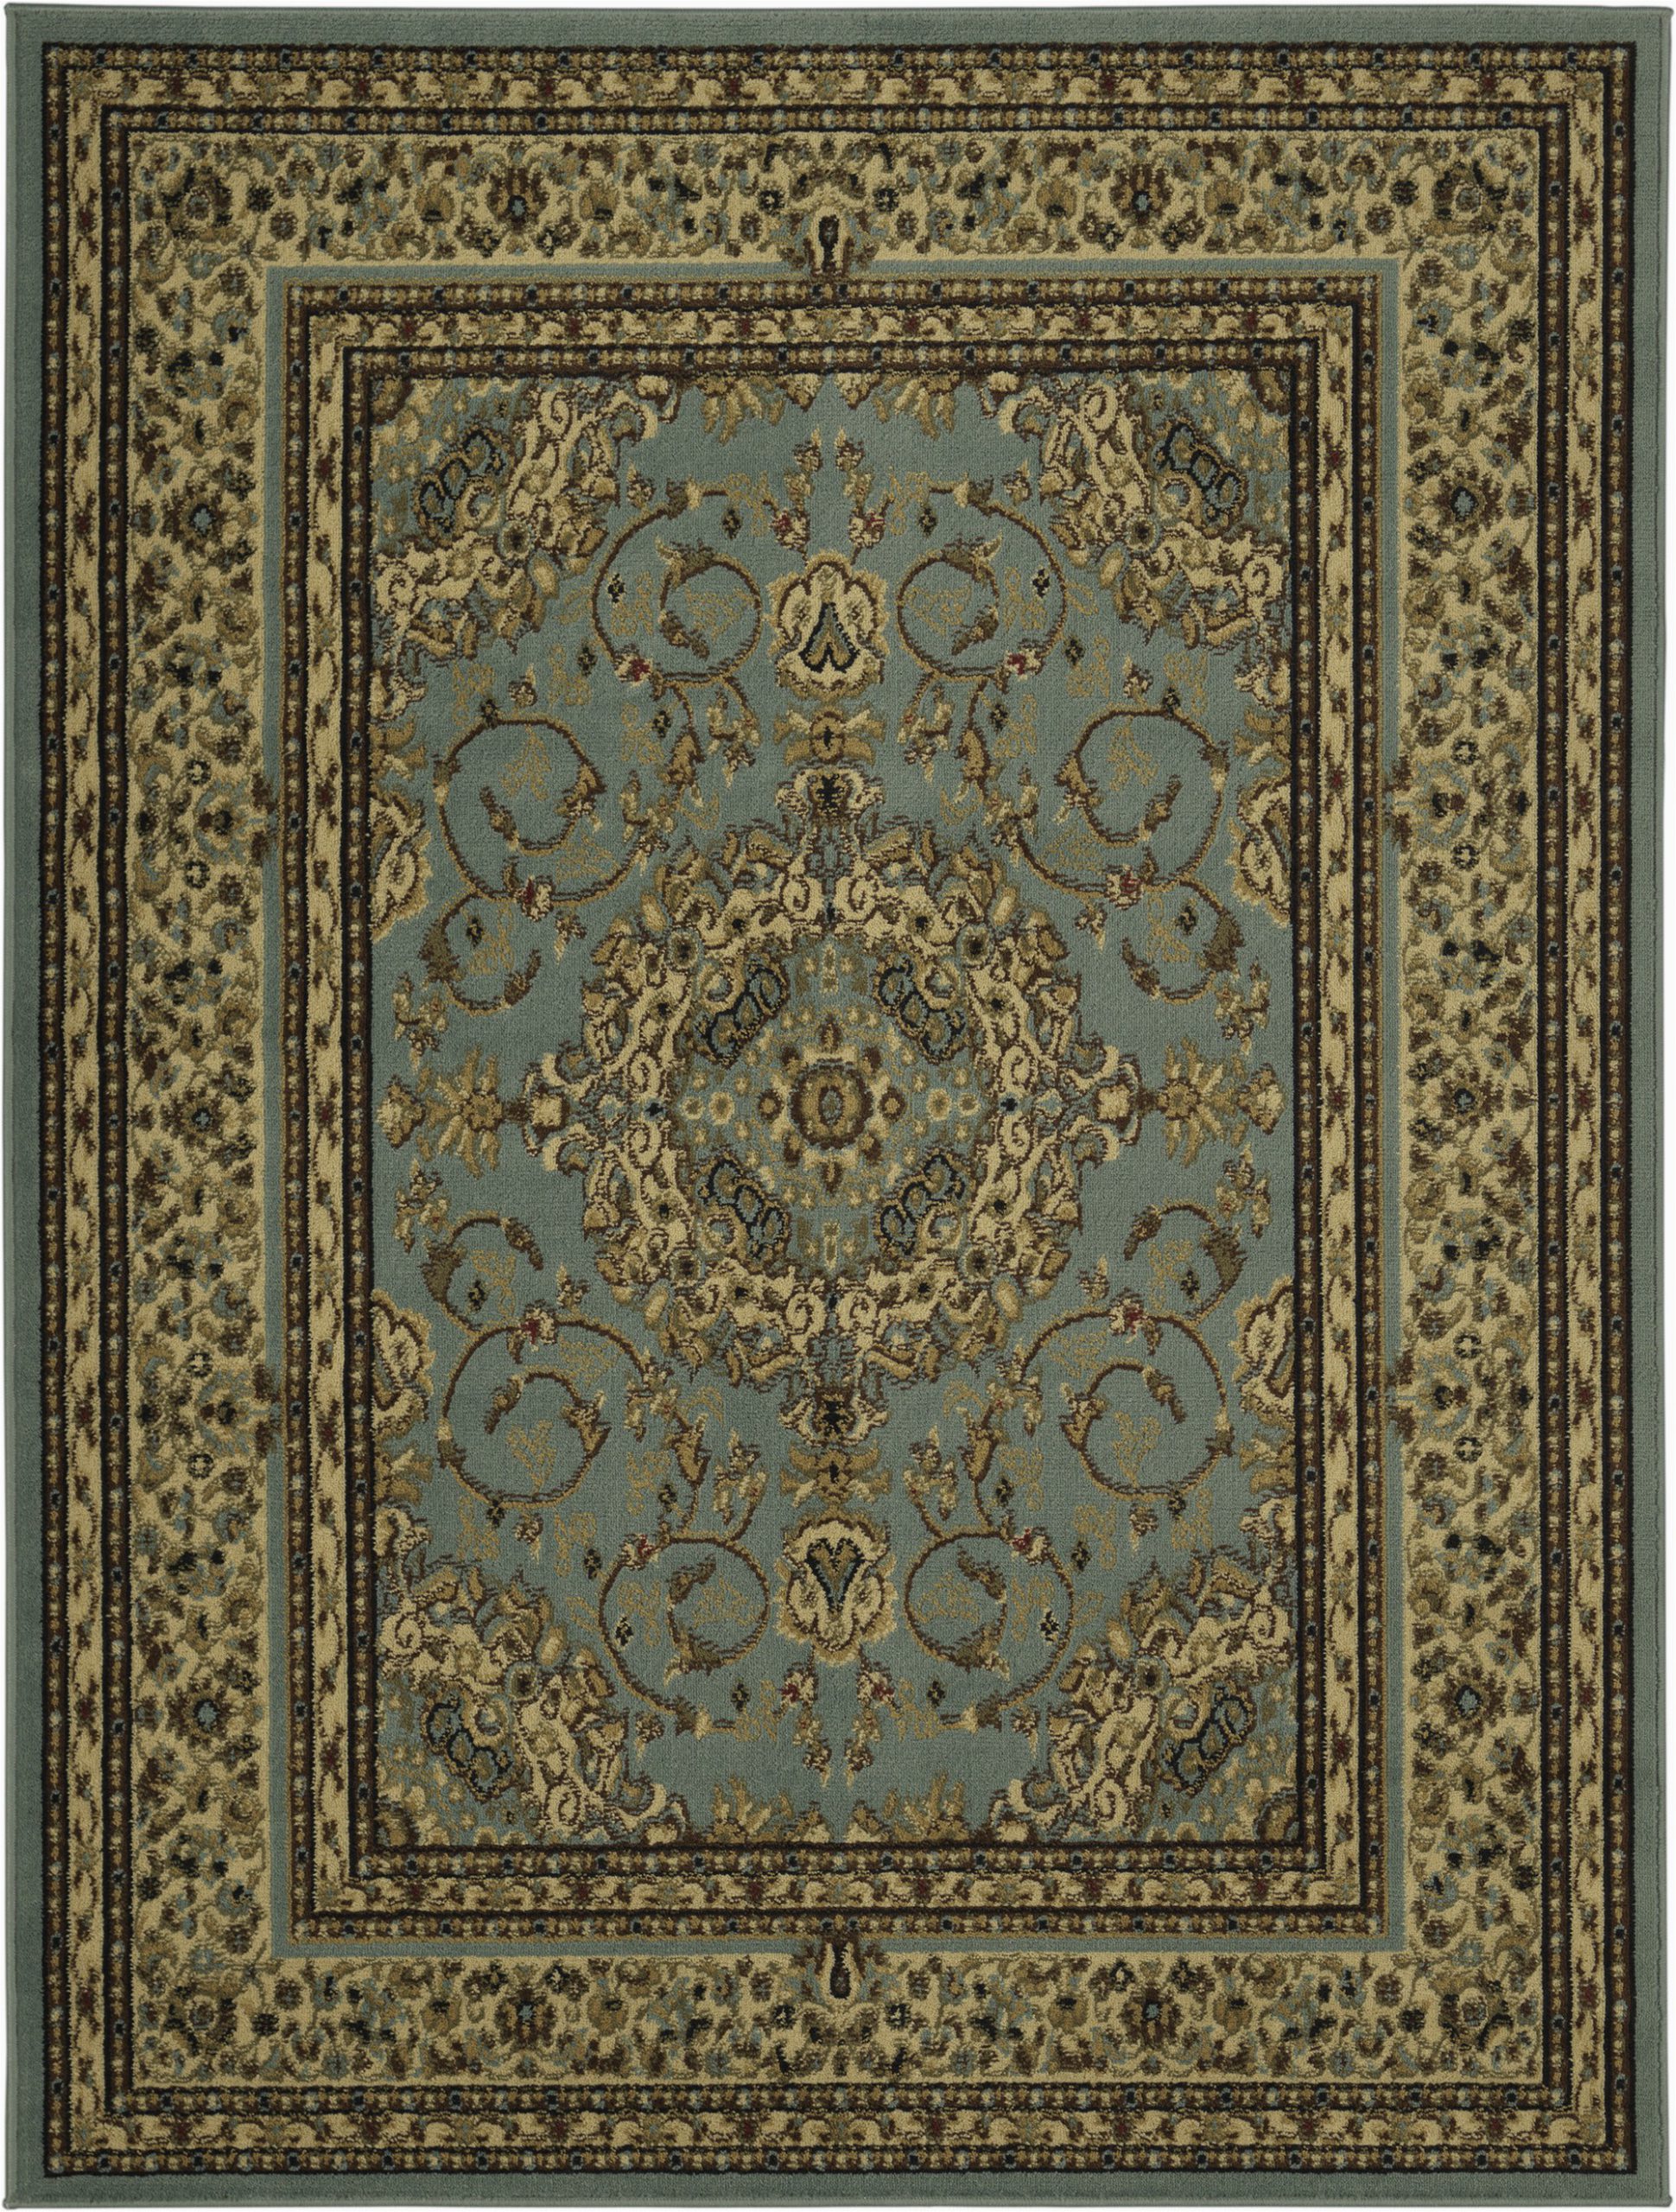 At Home Store area Rugs Sweet Home Stores King Collection isfahan oriental Medallion Design area Rug Seafoam Walmart